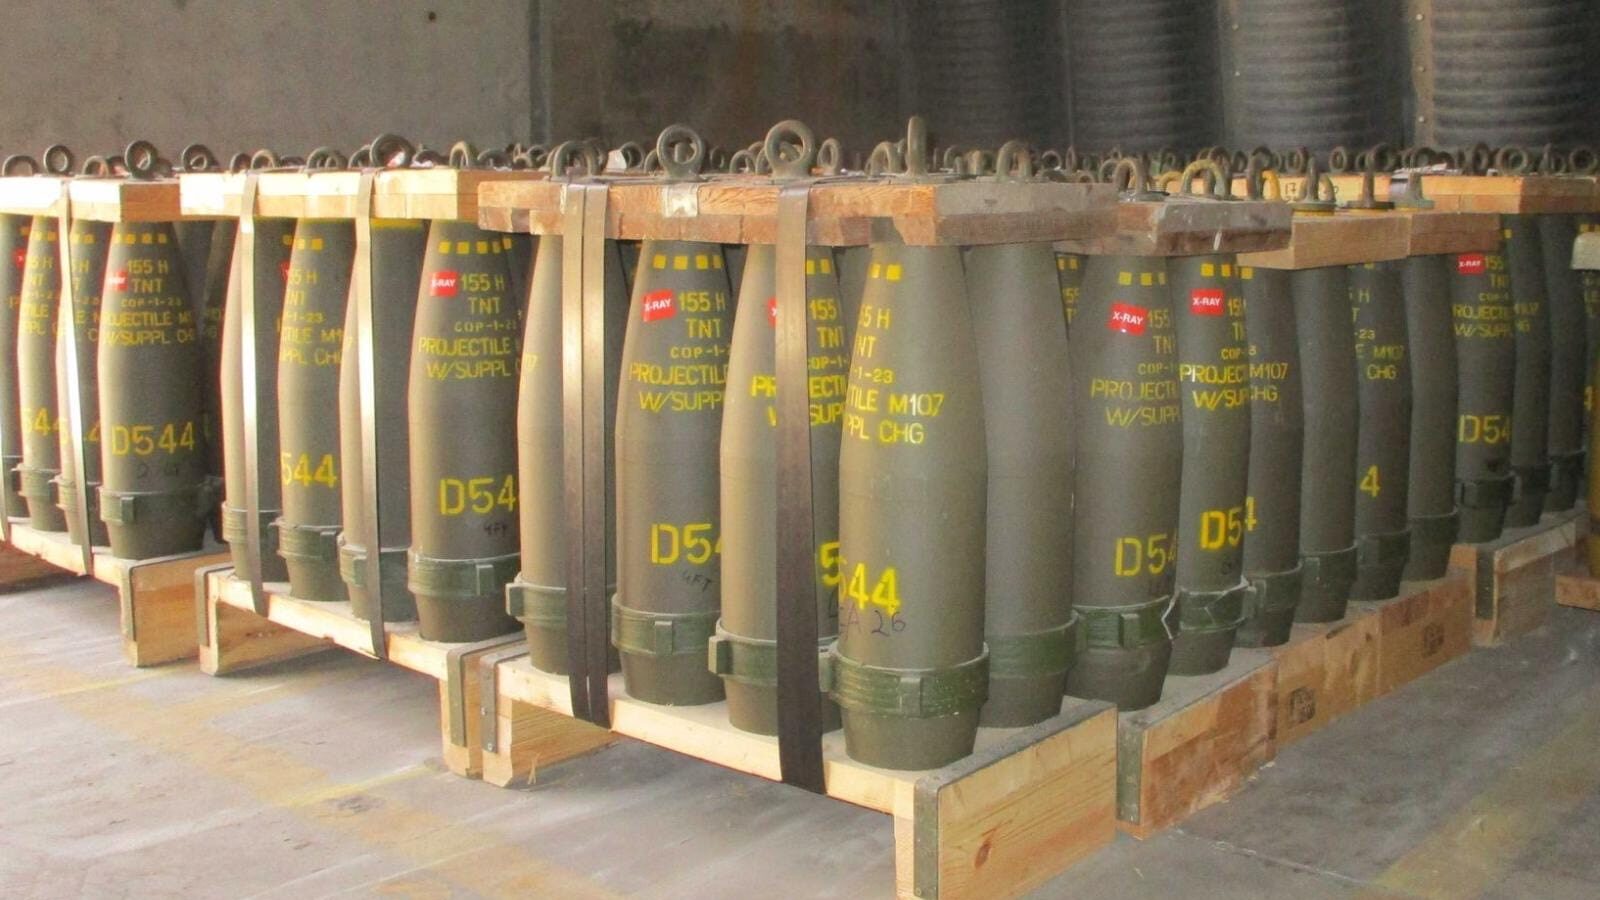 Israel buys tens of thousands of 155mm shells as global demand jumps